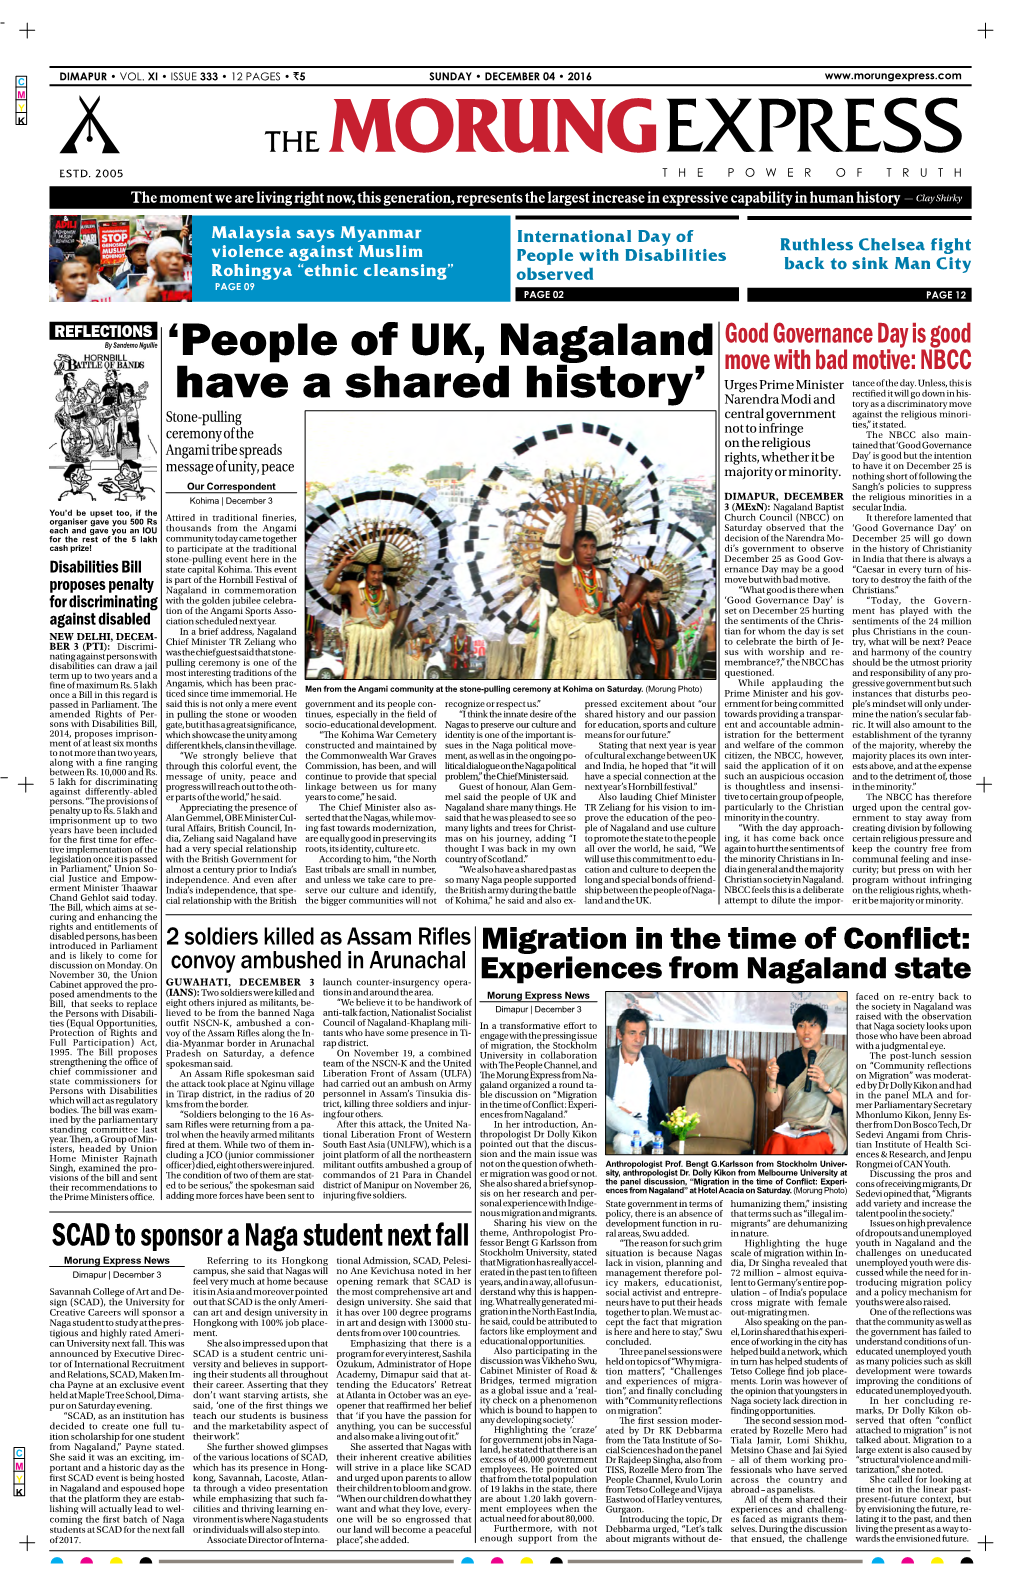 'People of UK, Nagaland Have a Shared History'